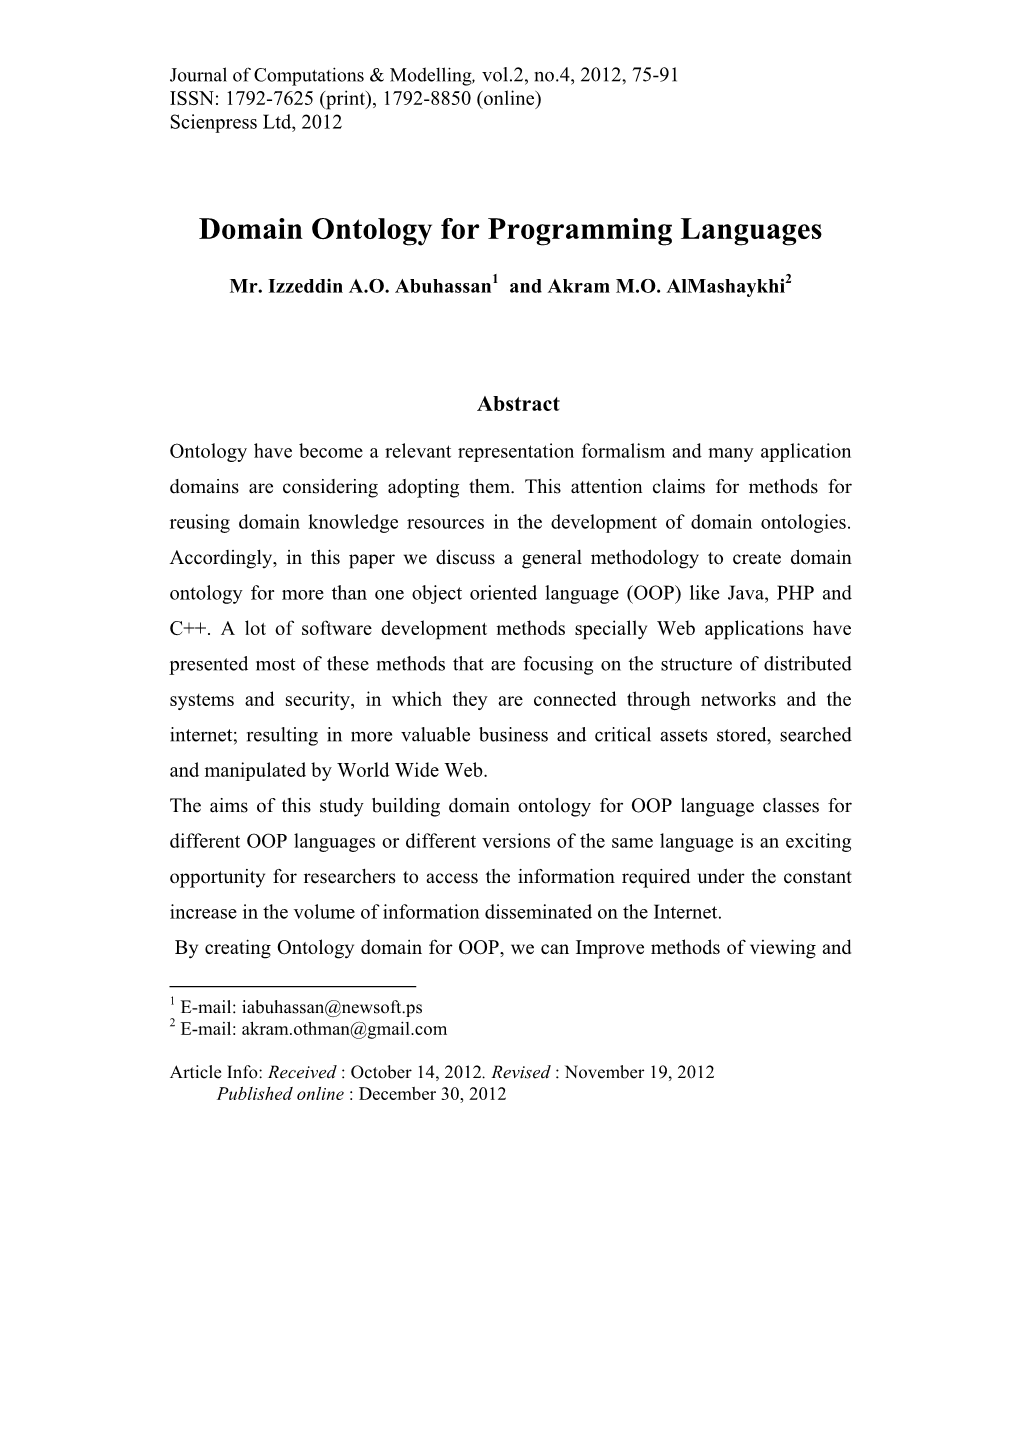 Domain Ontology for Programming Languages